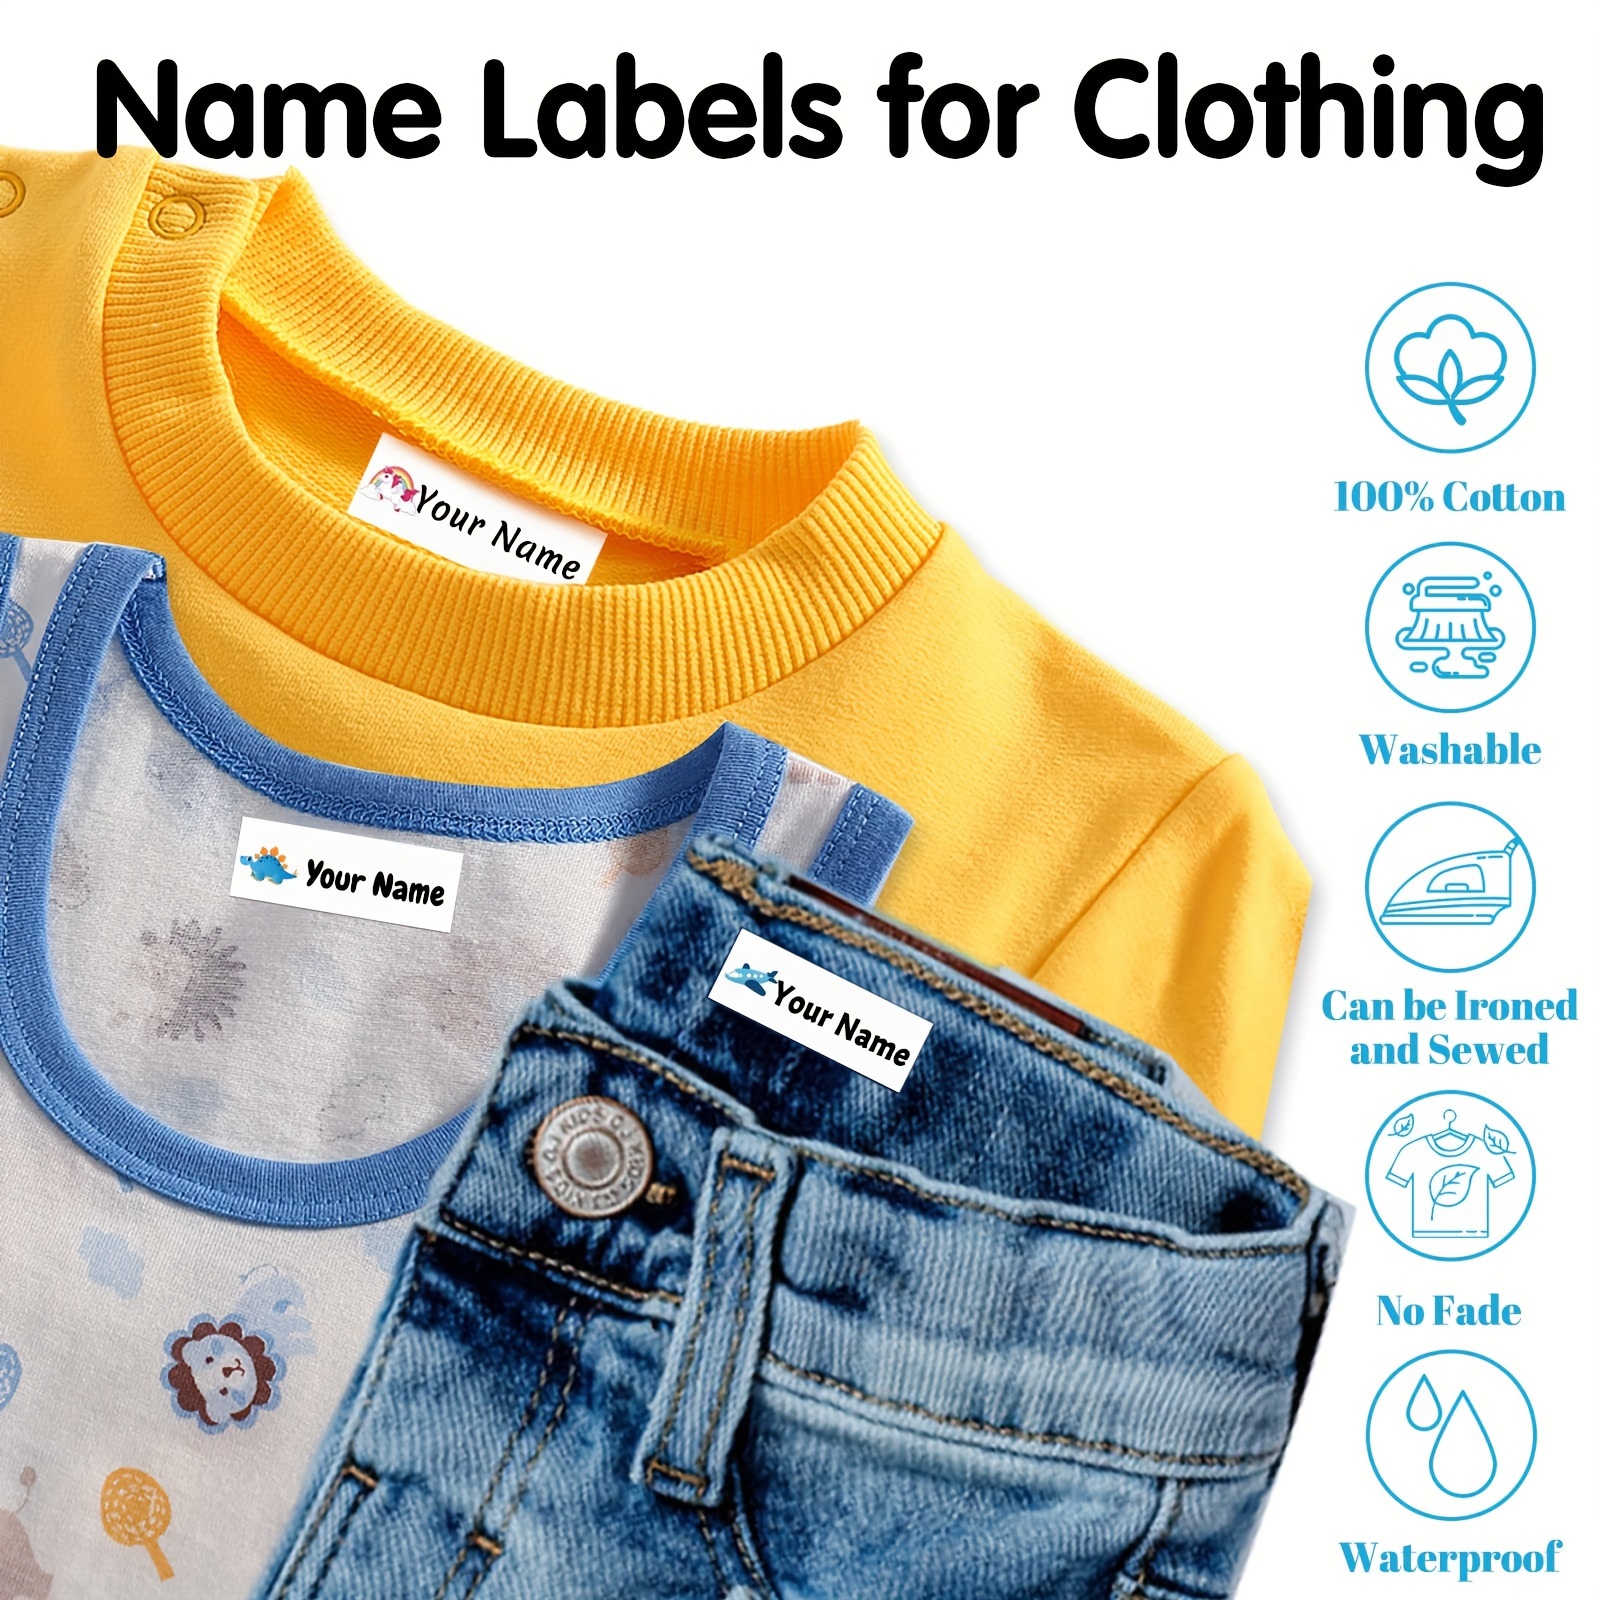 

36/64/100pcs Customized Clothing Tags, Personalized Washable Sewing/iron Name Tags, Suitable For School Uniforms, Sheets, Socks, School Bags